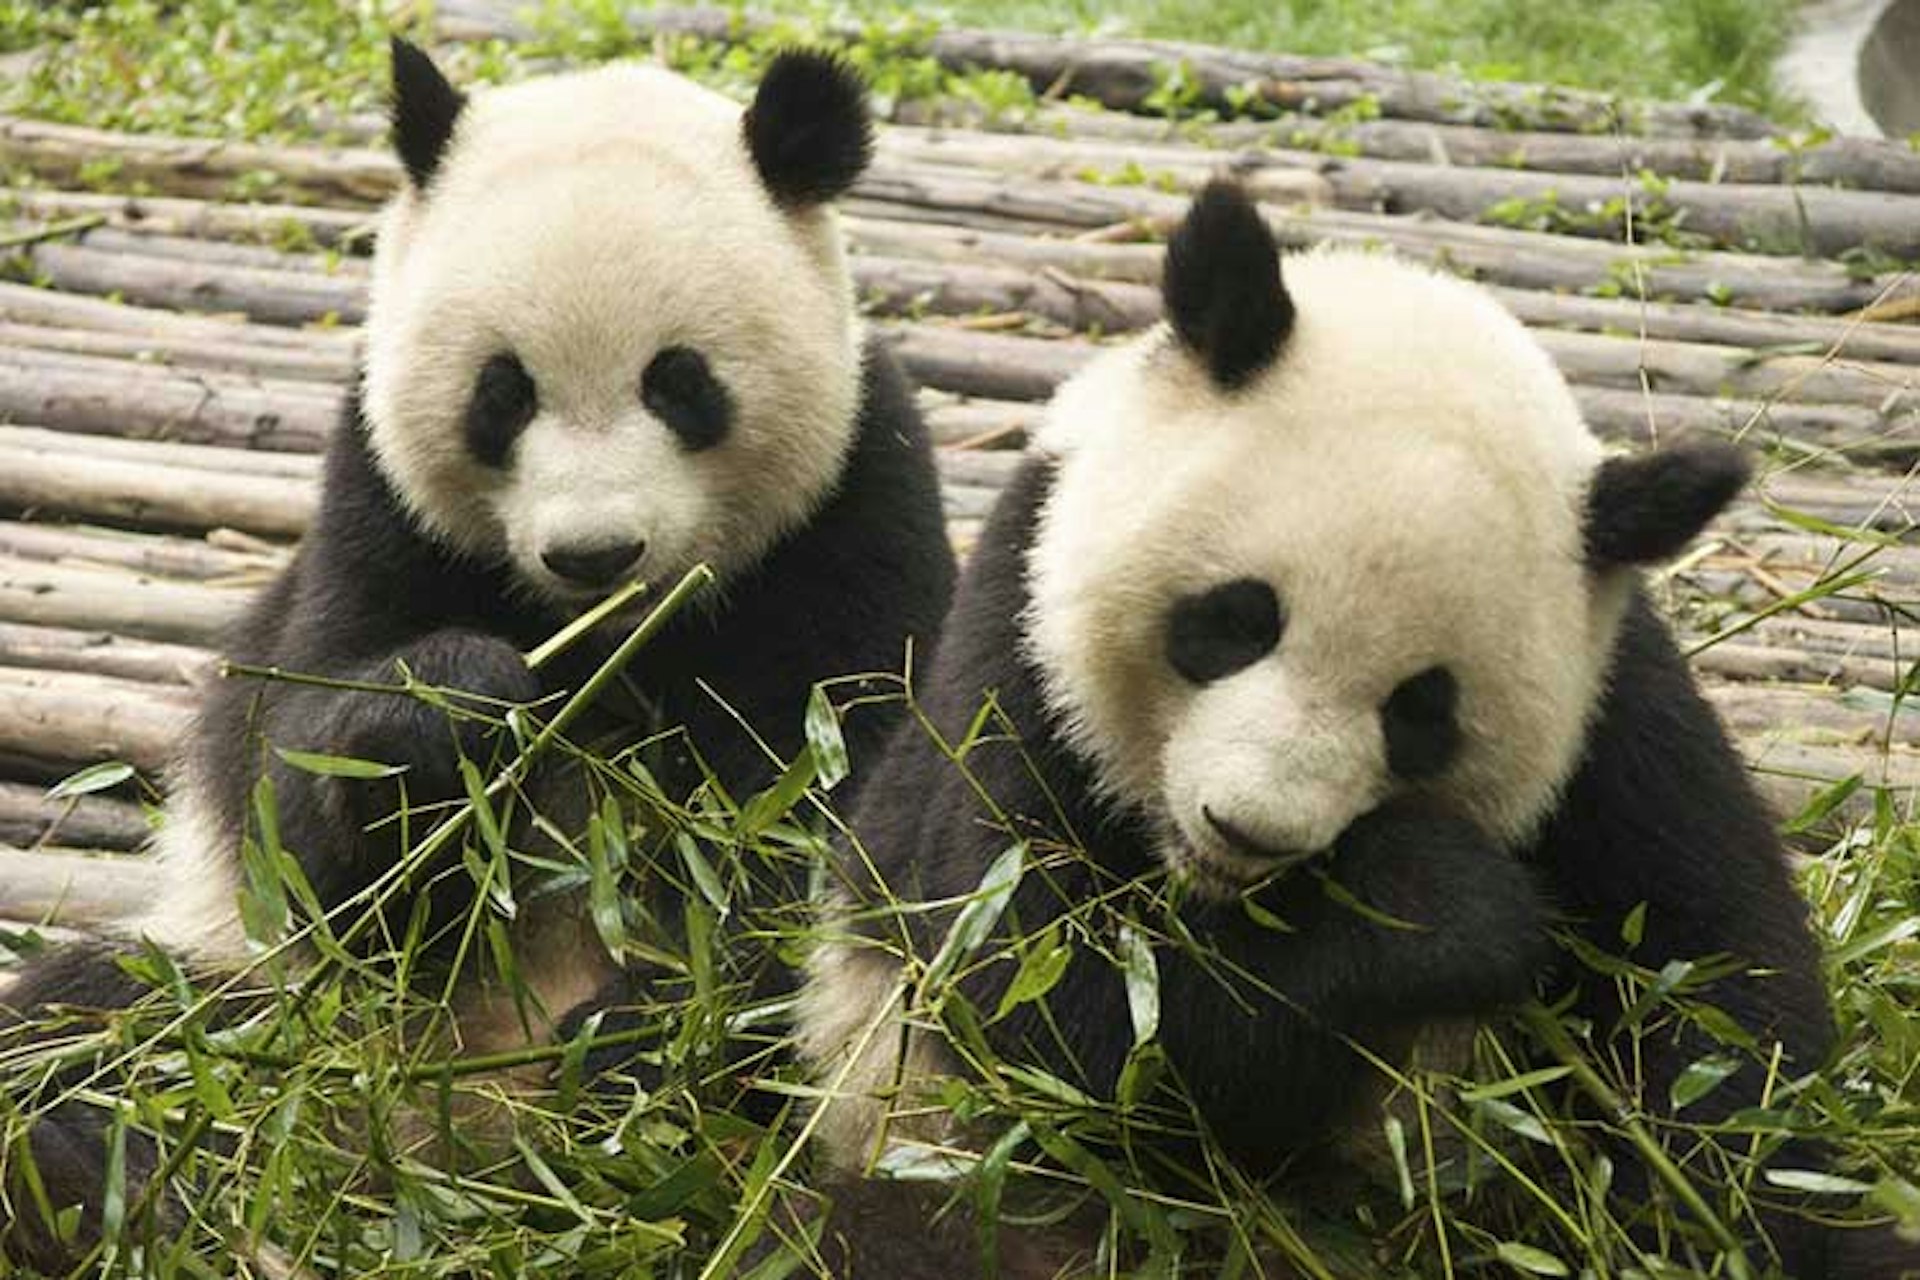 Pandas munching at the Chengdu Breeding Centre. Image by claire rowland / CC BY 2.0